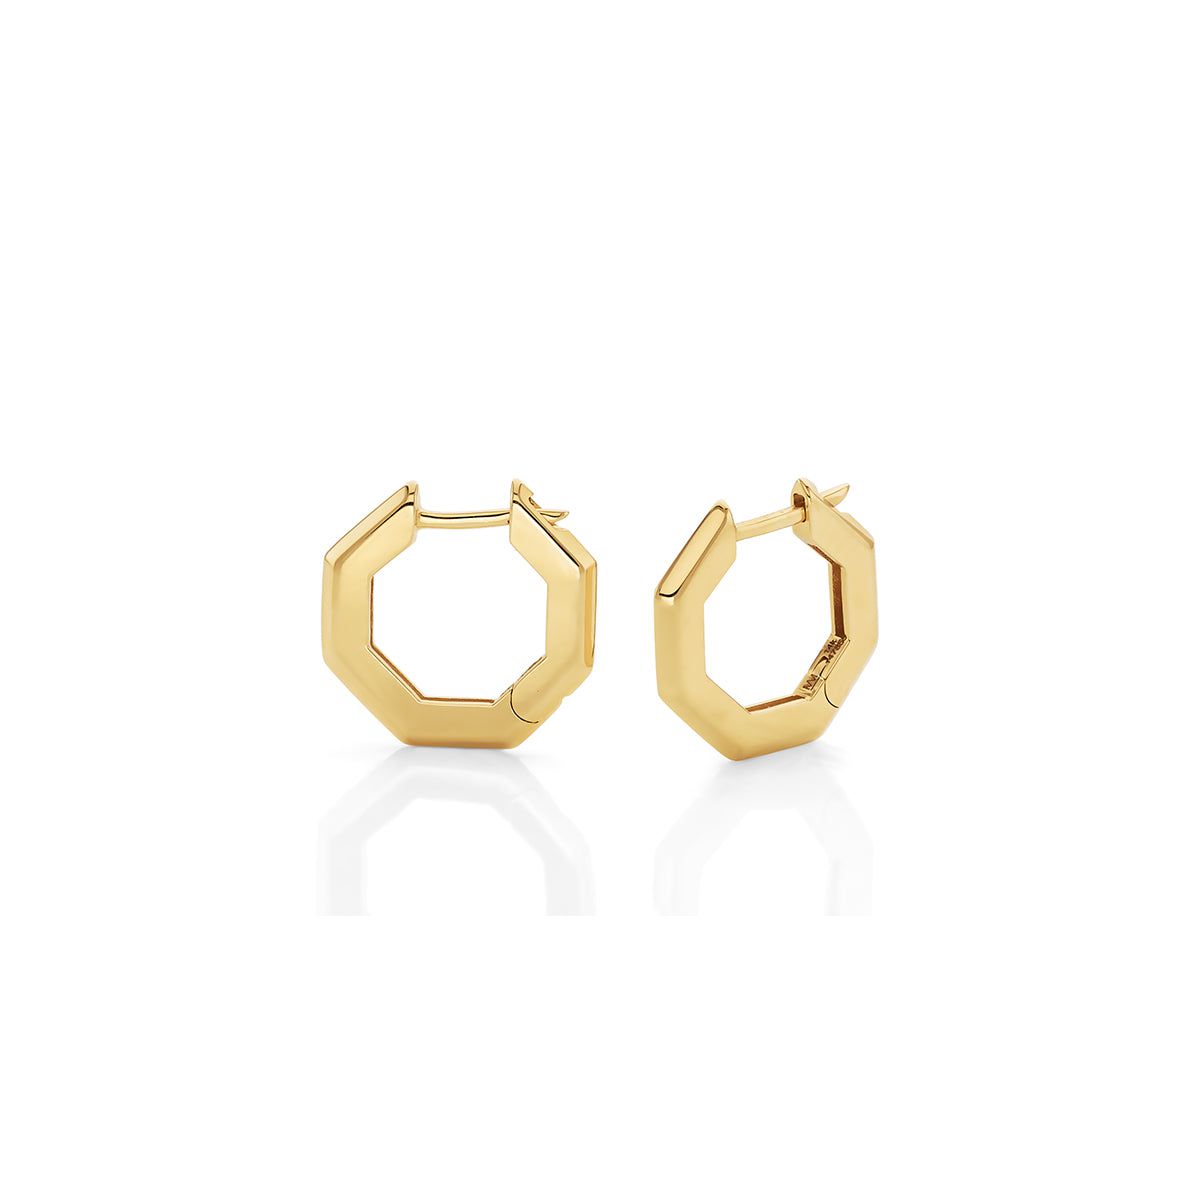 MICHAEL M Fashion Rings 14K Yellow Gold Small Octave Knifed Hoop Earrings ER550-S-YG